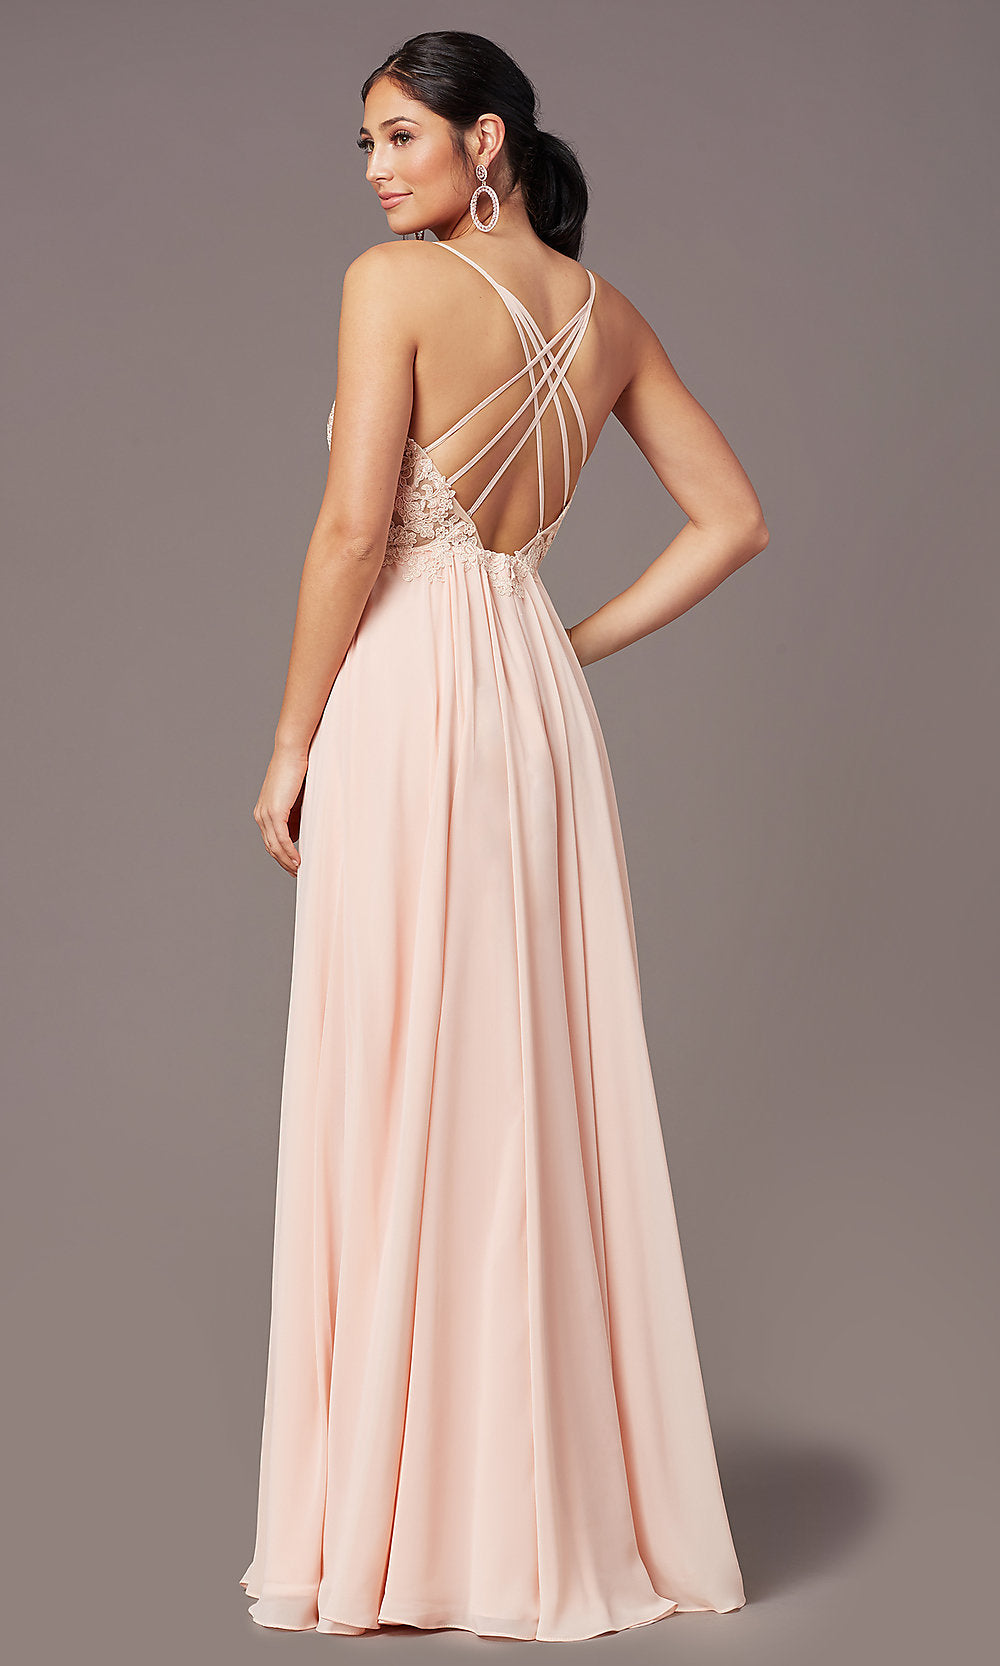 PromGirl Long Prom Dress with Double-Slit Skirt